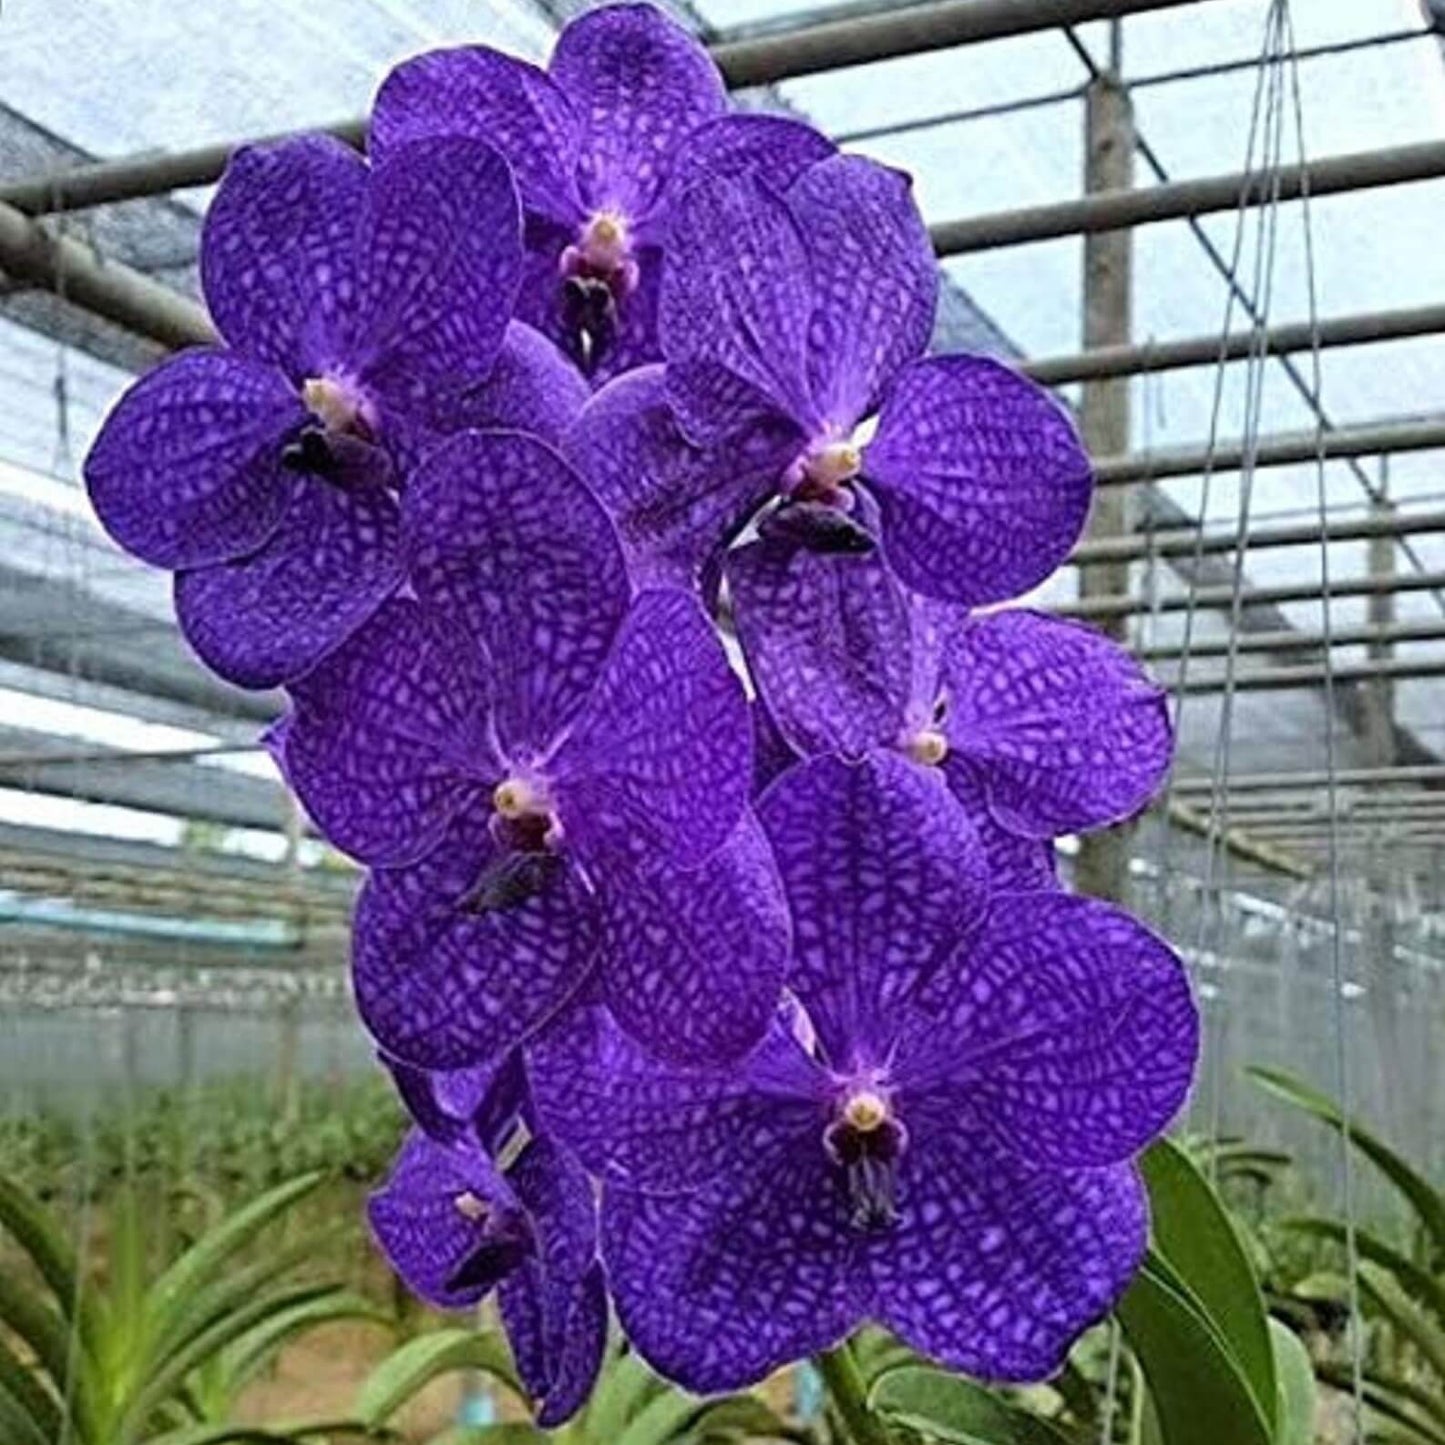 Live Orchid Vanda Flower Plant from Hawaii | Exotic Blue/Purple/Pink/Red Flower | Free Shipping in a Hanging Basket from Hawaii